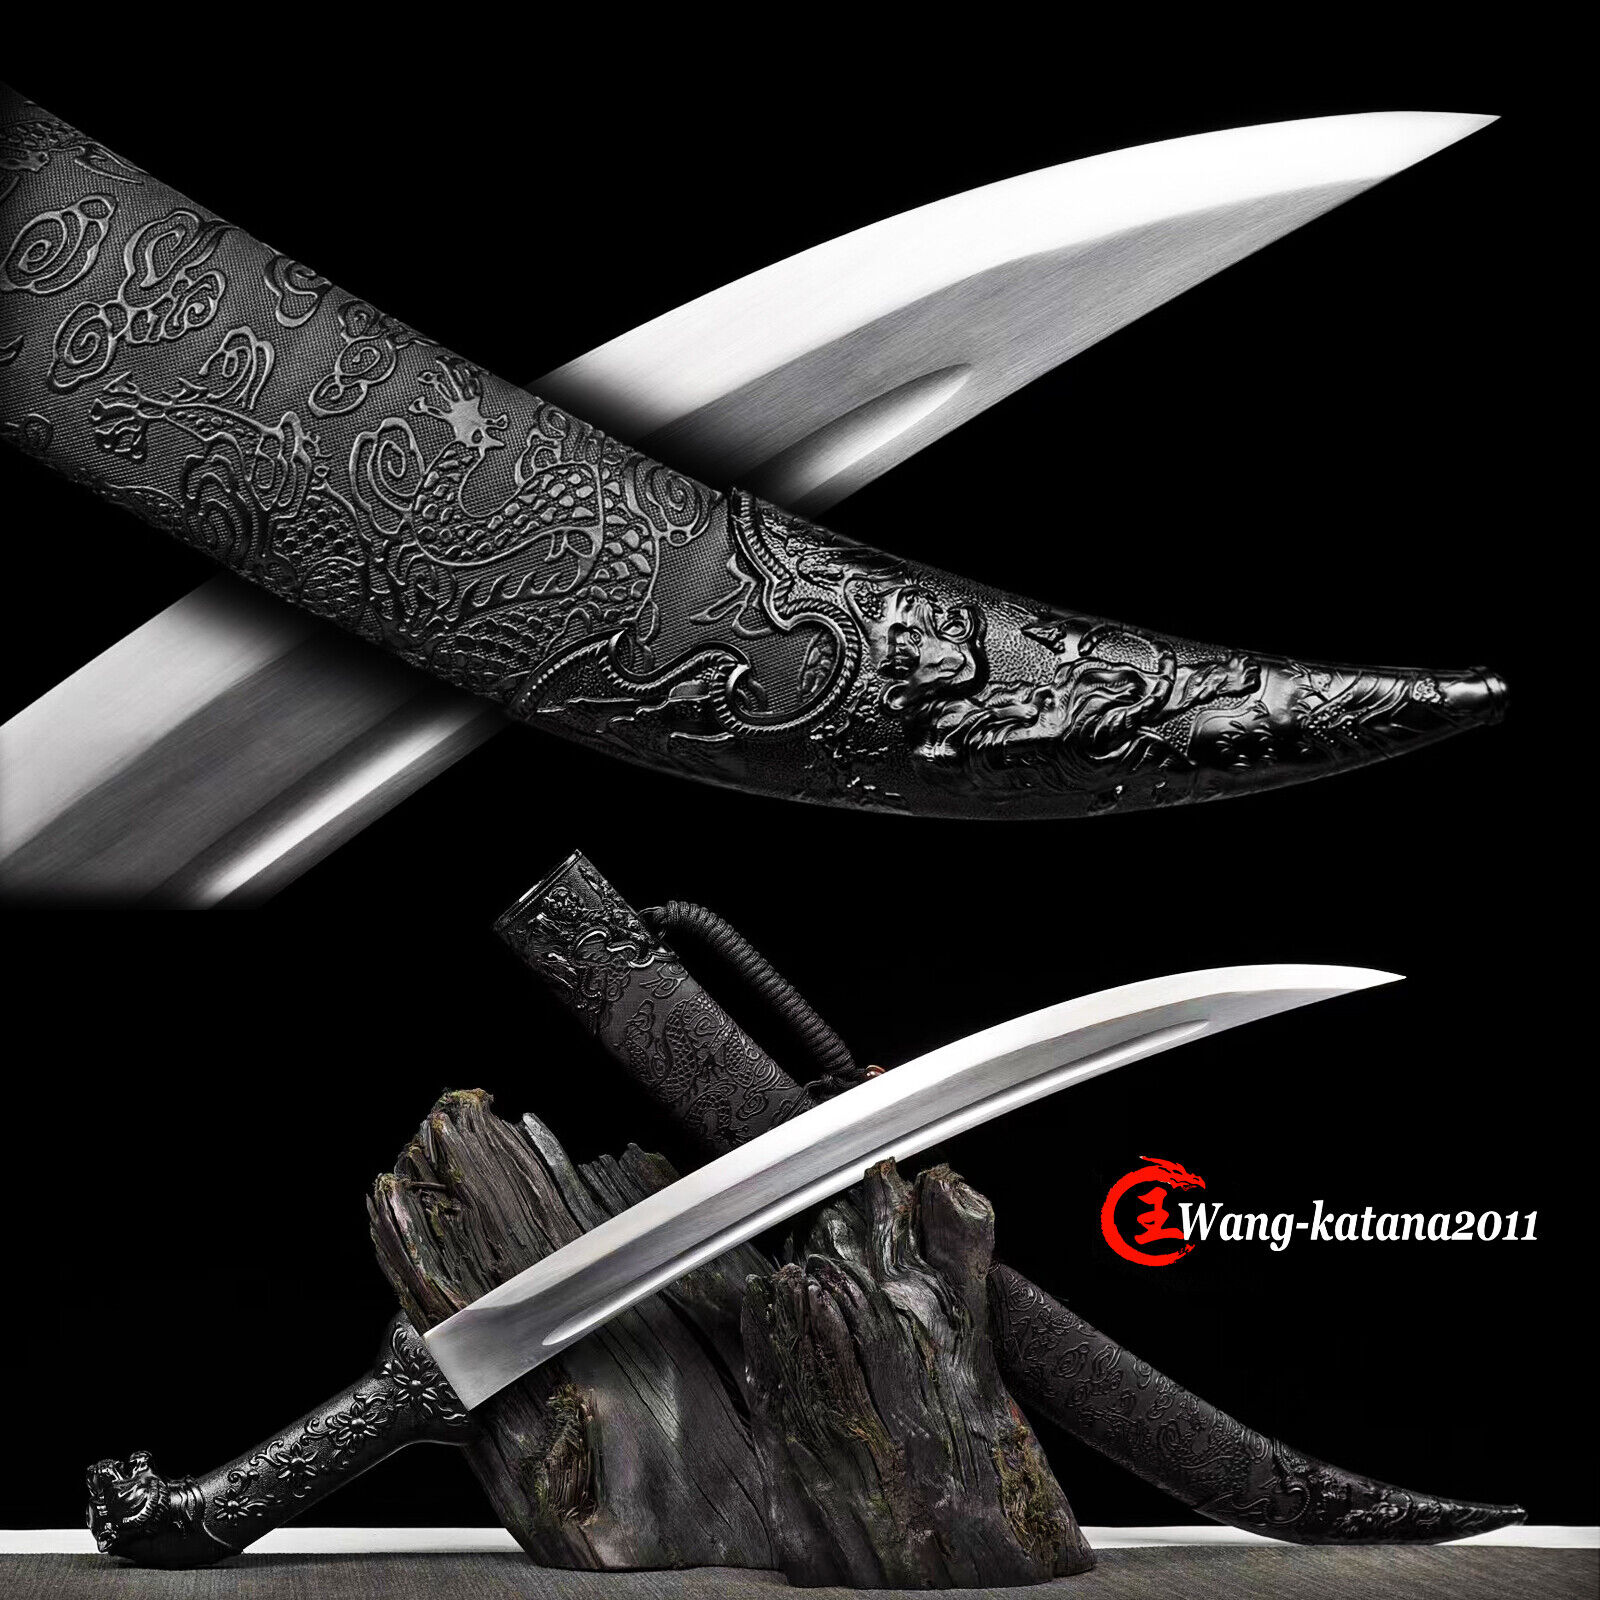 28''Mongolian Dao Chinese Tanto 1095 Carbon Steel Self-defence Sharp Short Sword